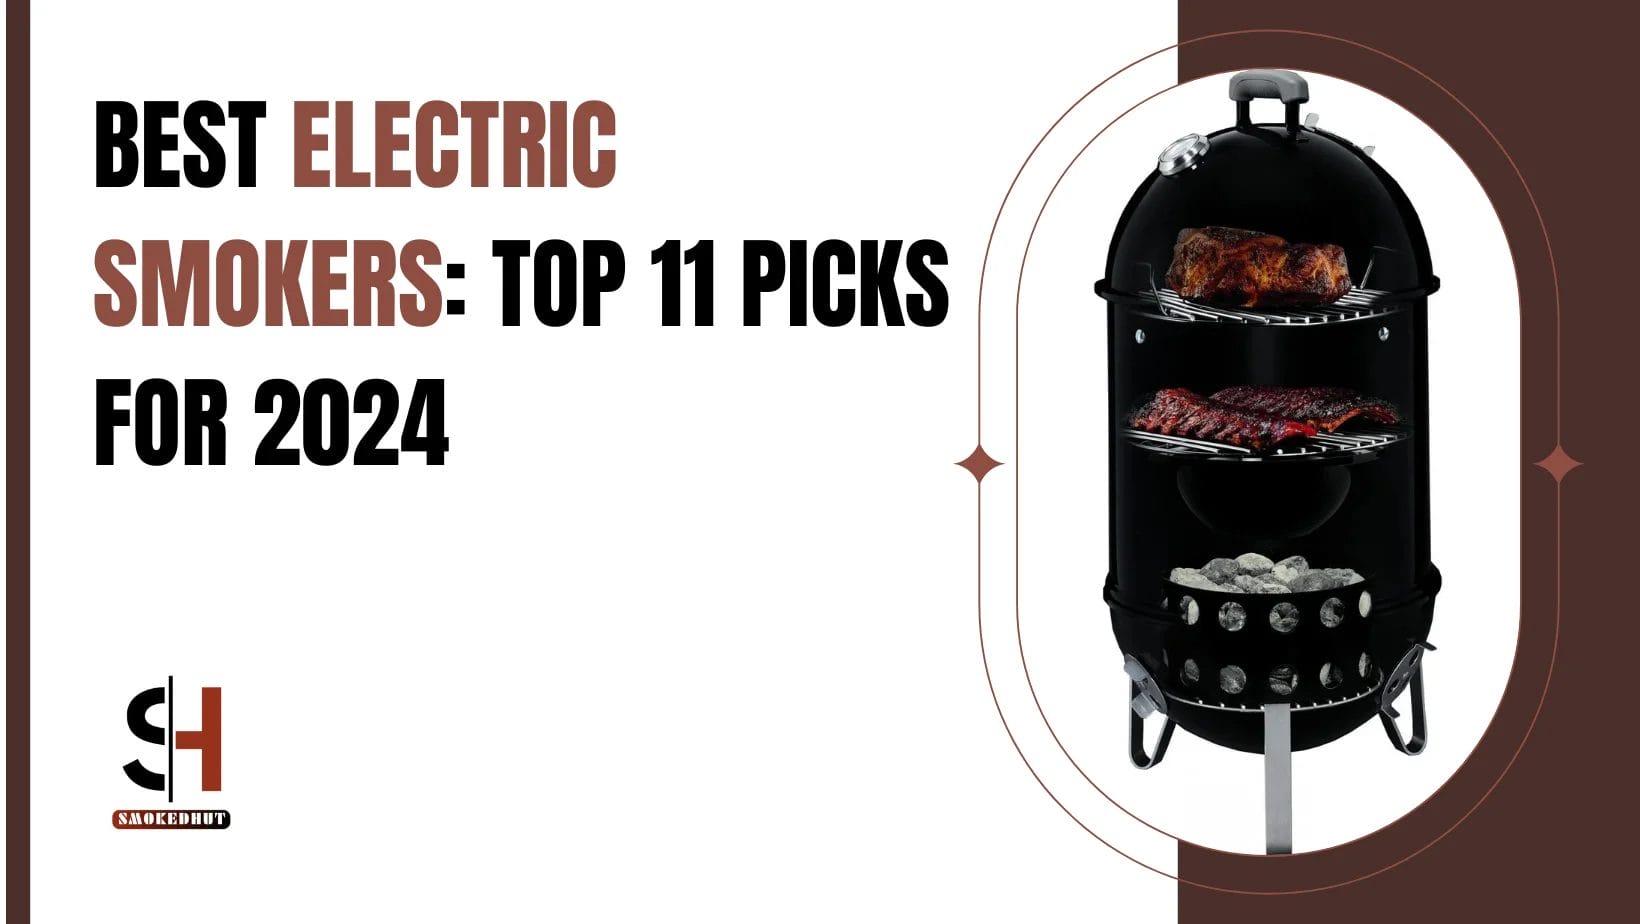 BEST ELECTRIC SMOKERS: TOP 11 PICKS FOR 2024